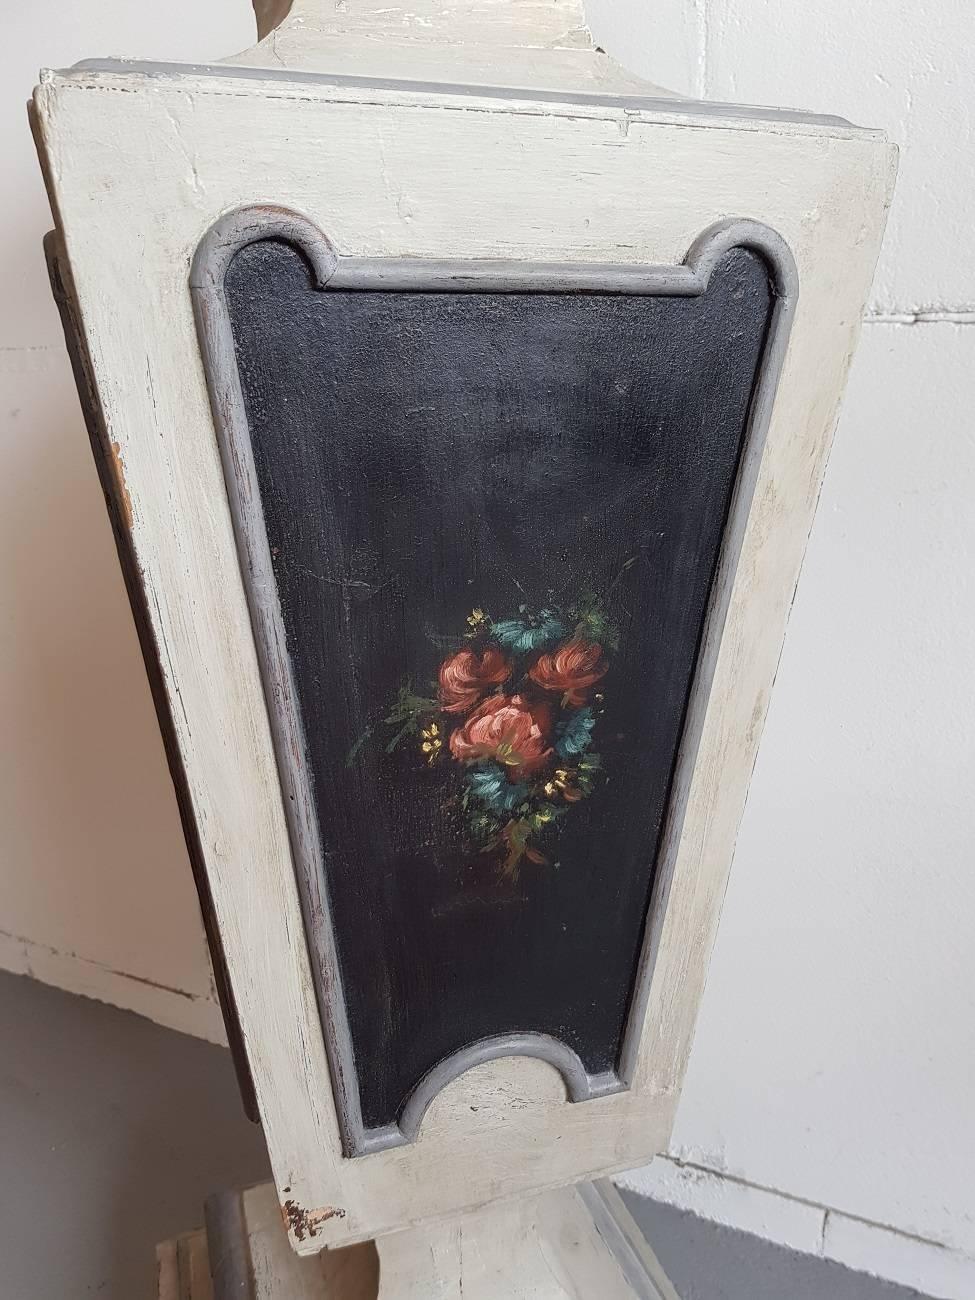 Early 19th century French painted wooden column, it's painted in the colors grey and white with on all panels around a painted floral decor on black background.
It has a lovely distressed patina all around.

The measurements are,
Depth 33 cm/